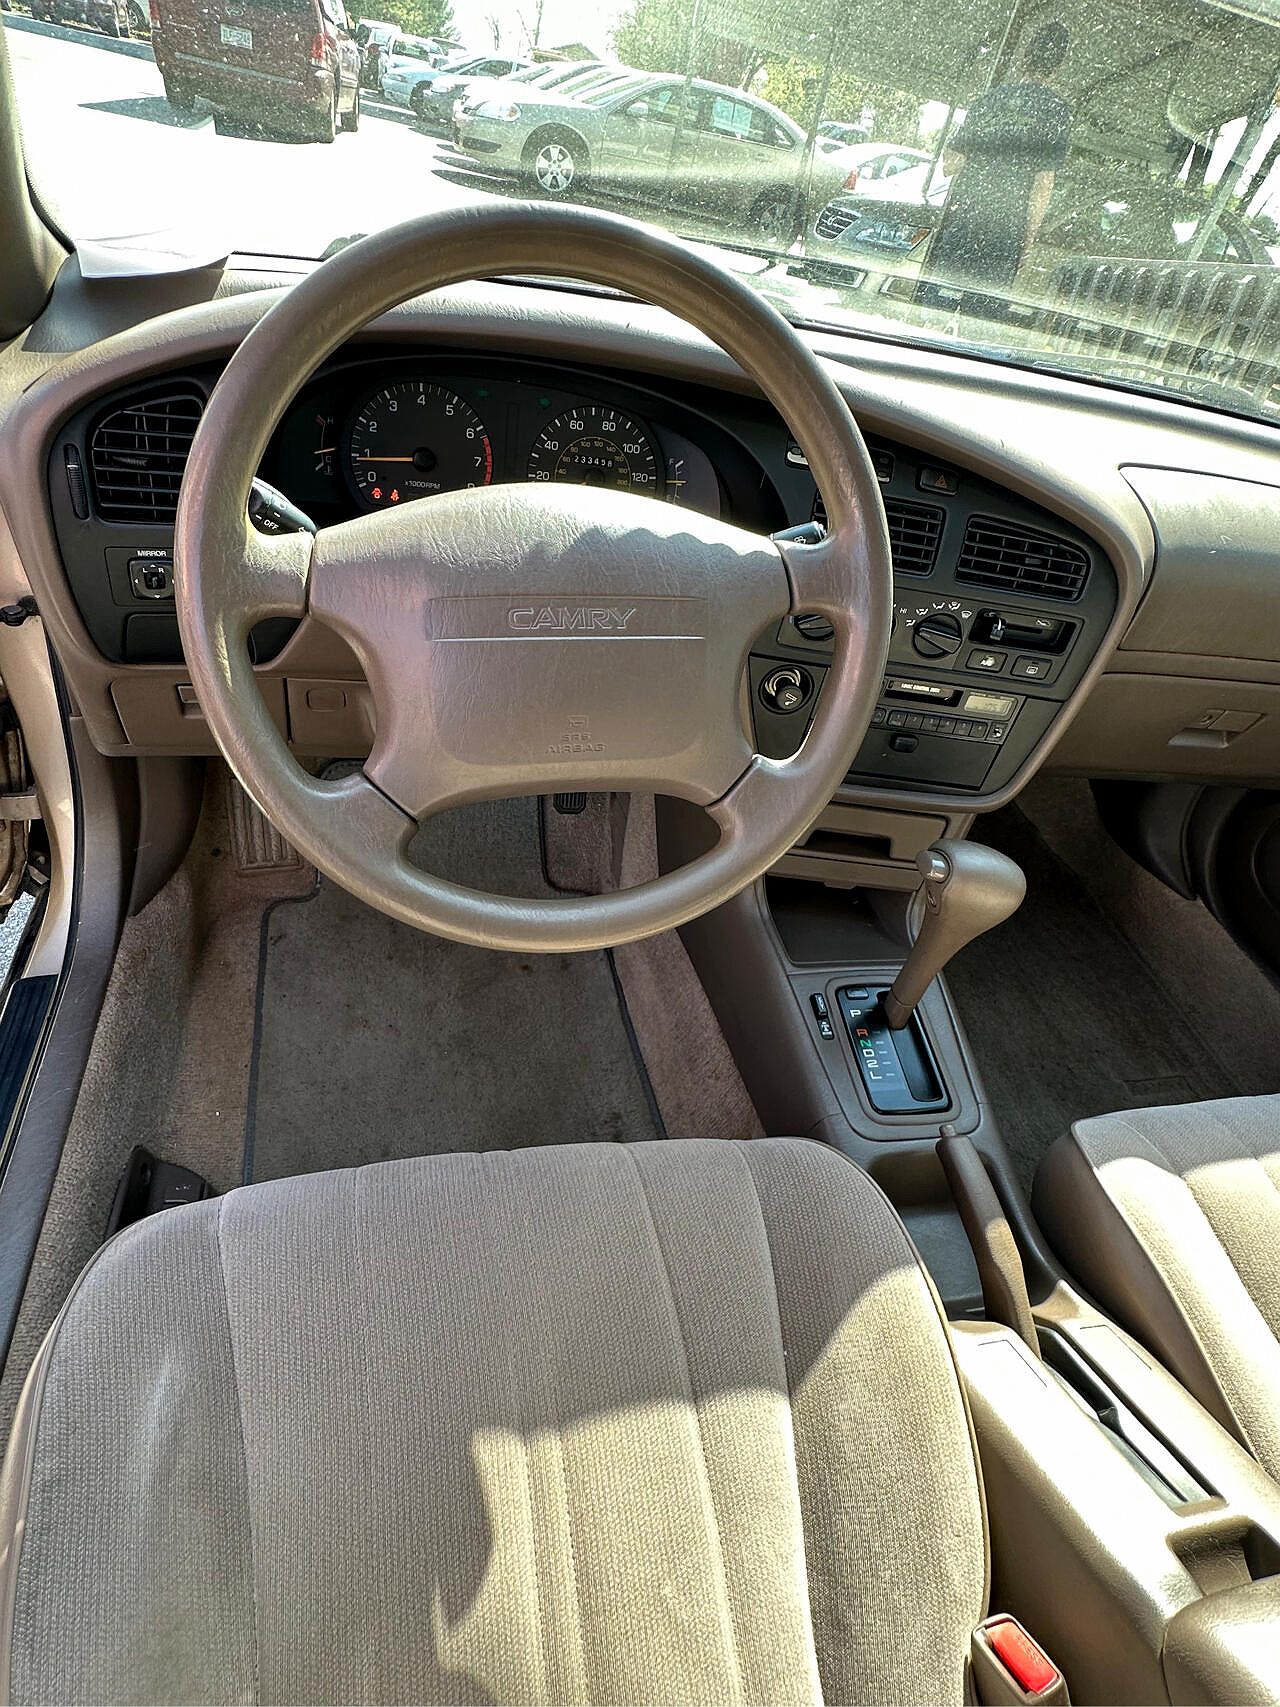 1996 Toyota Camry DX image 4